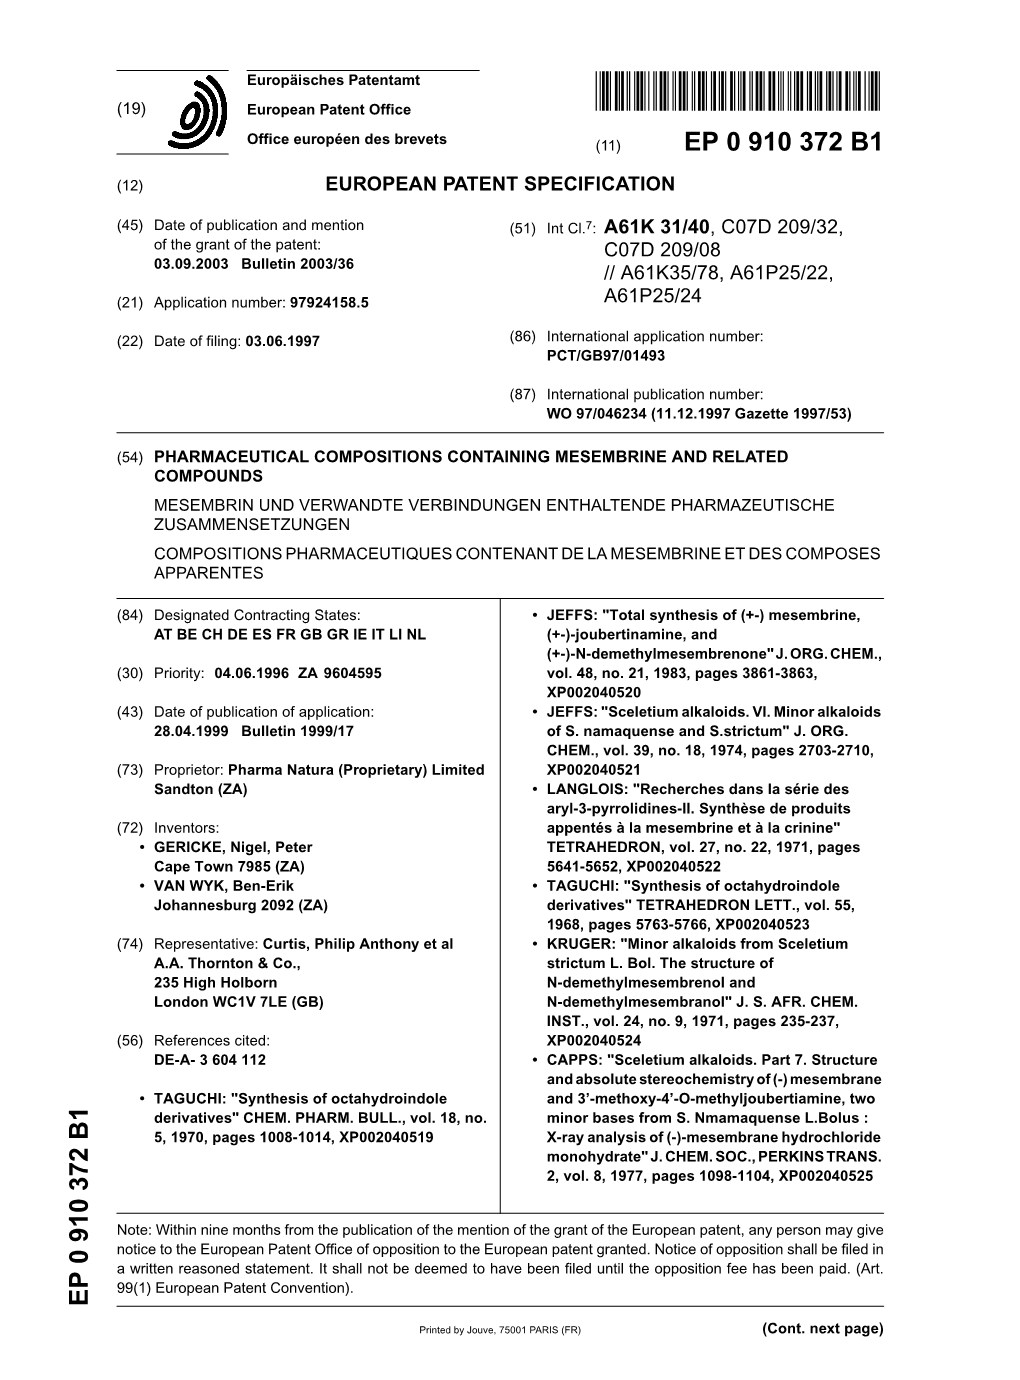 Pharmaceutical Compositions Containing Mesembrine And